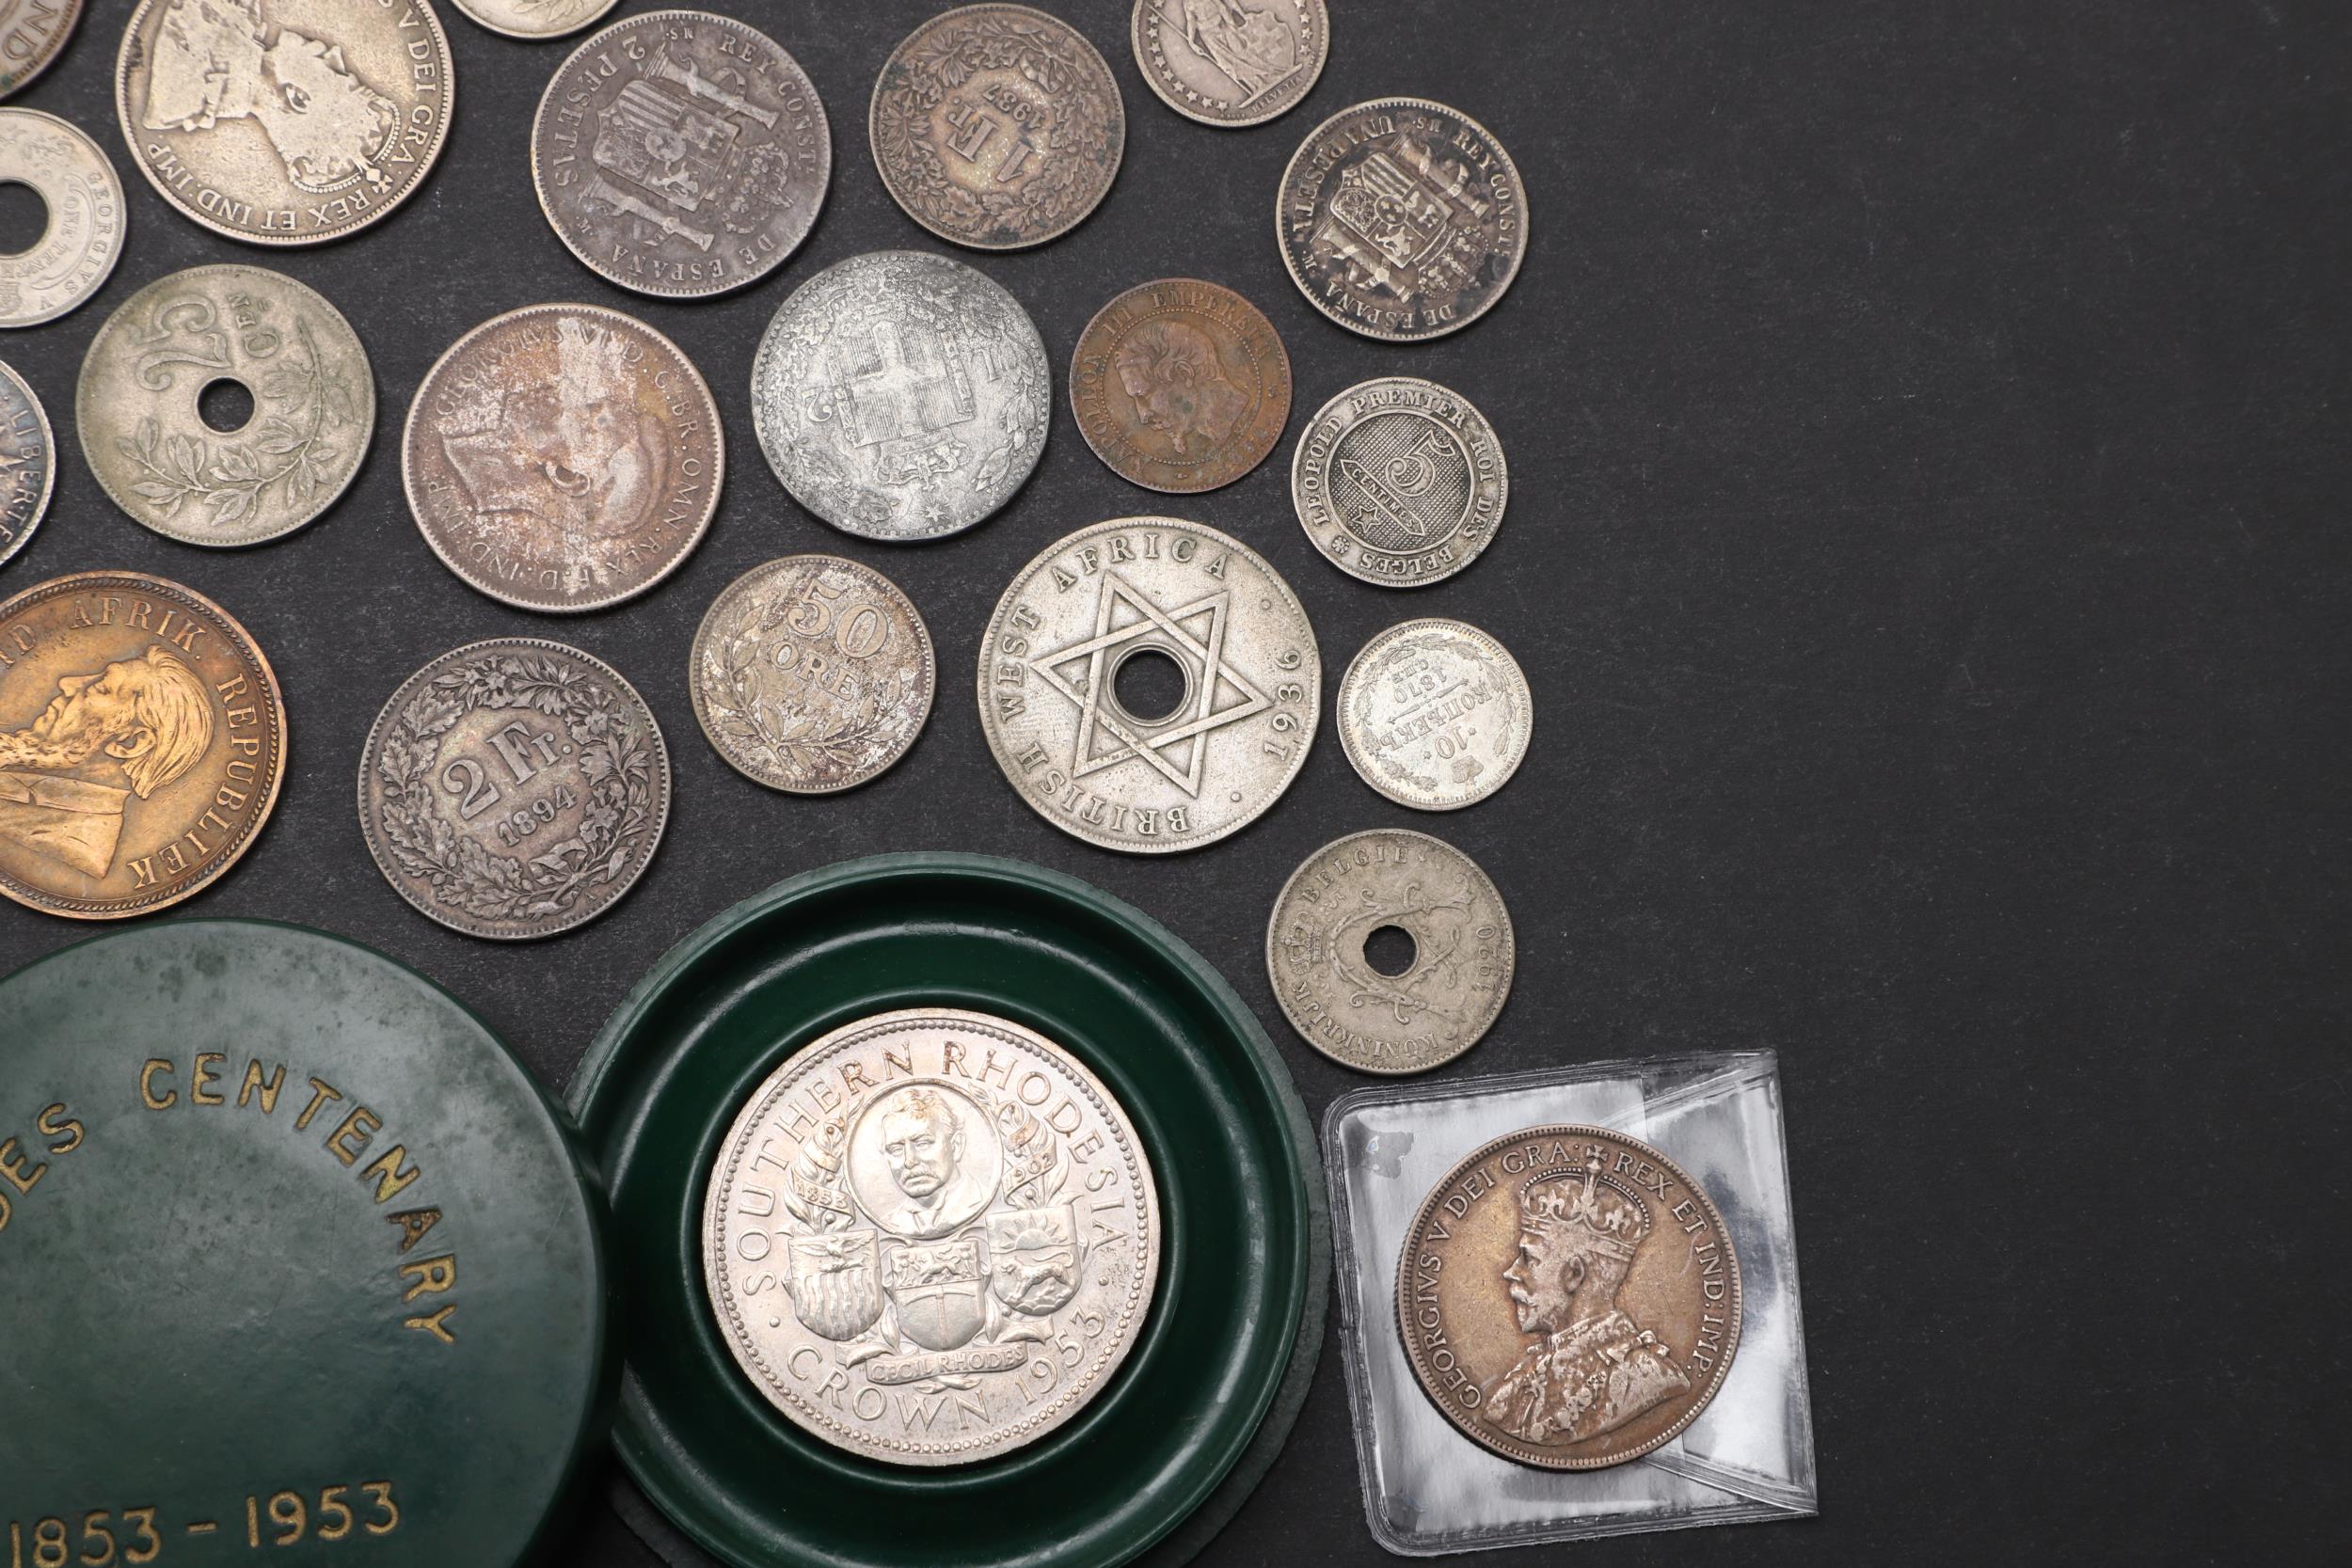 AN INTERESTING COLLECTION OF SOUTH AFRICAN AND OTHER WORLD COINS. - Image 7 of 7